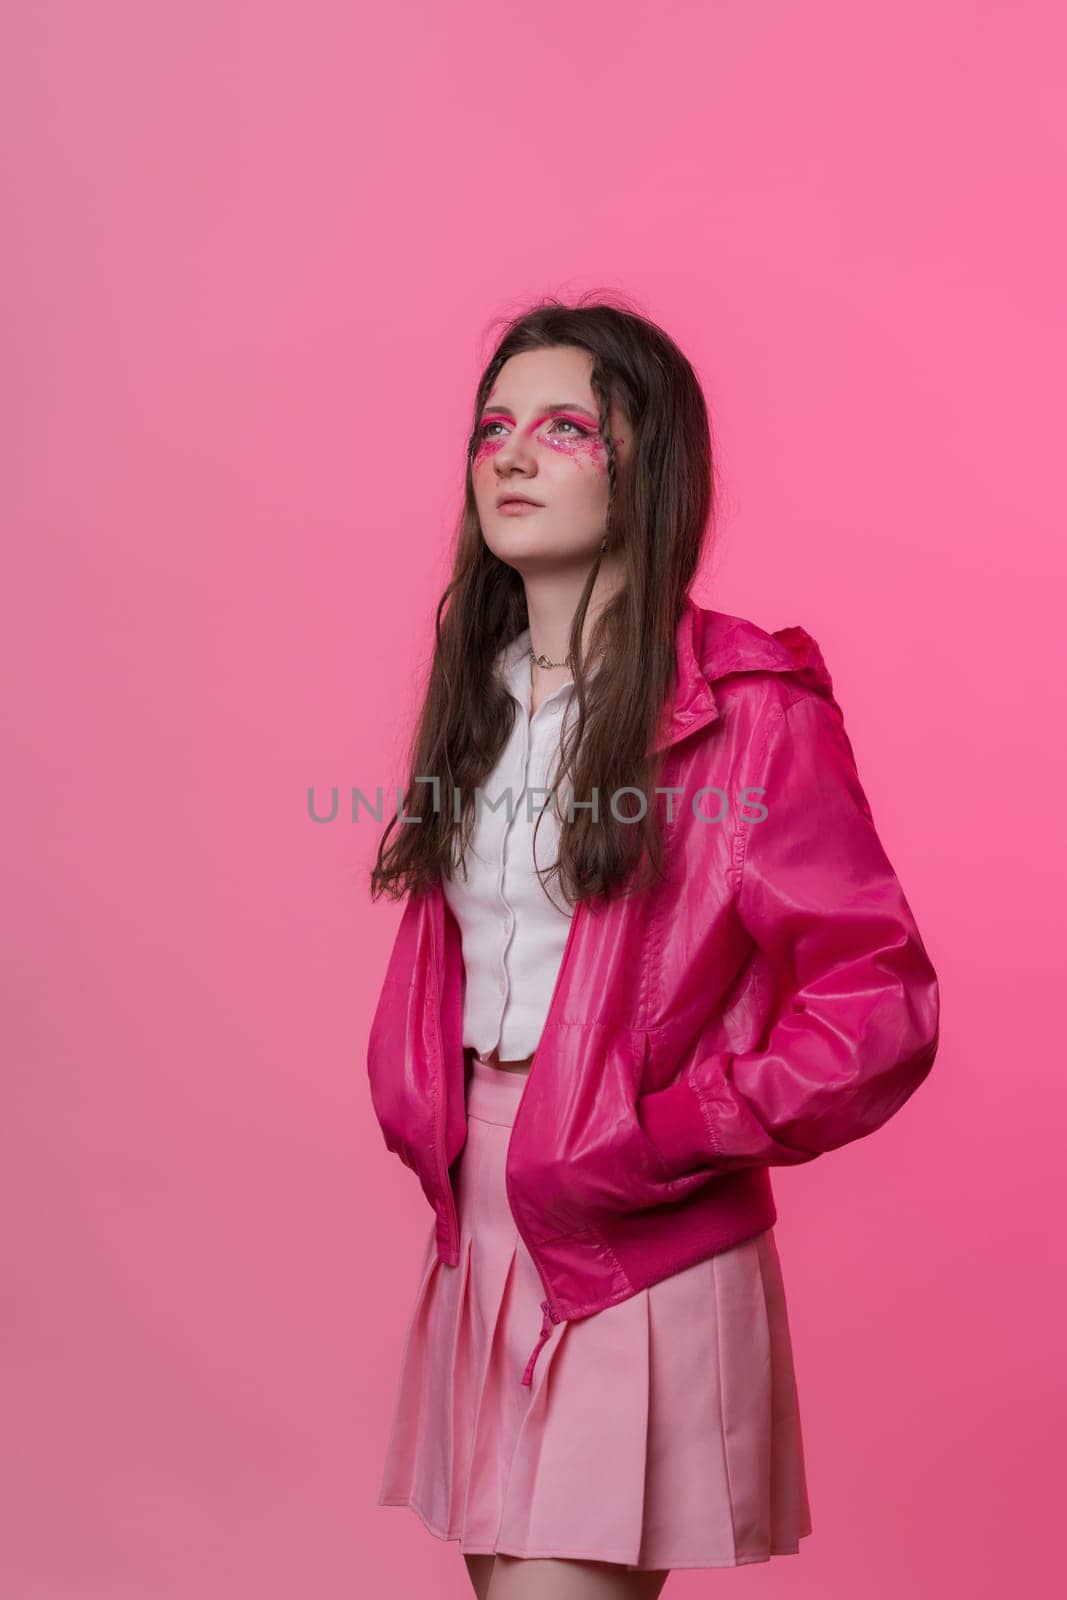 Portrait of woman with pink make-up, dressed in pink jacket, skirt and white t-shirt. Studio shot by Alexander-Piragis